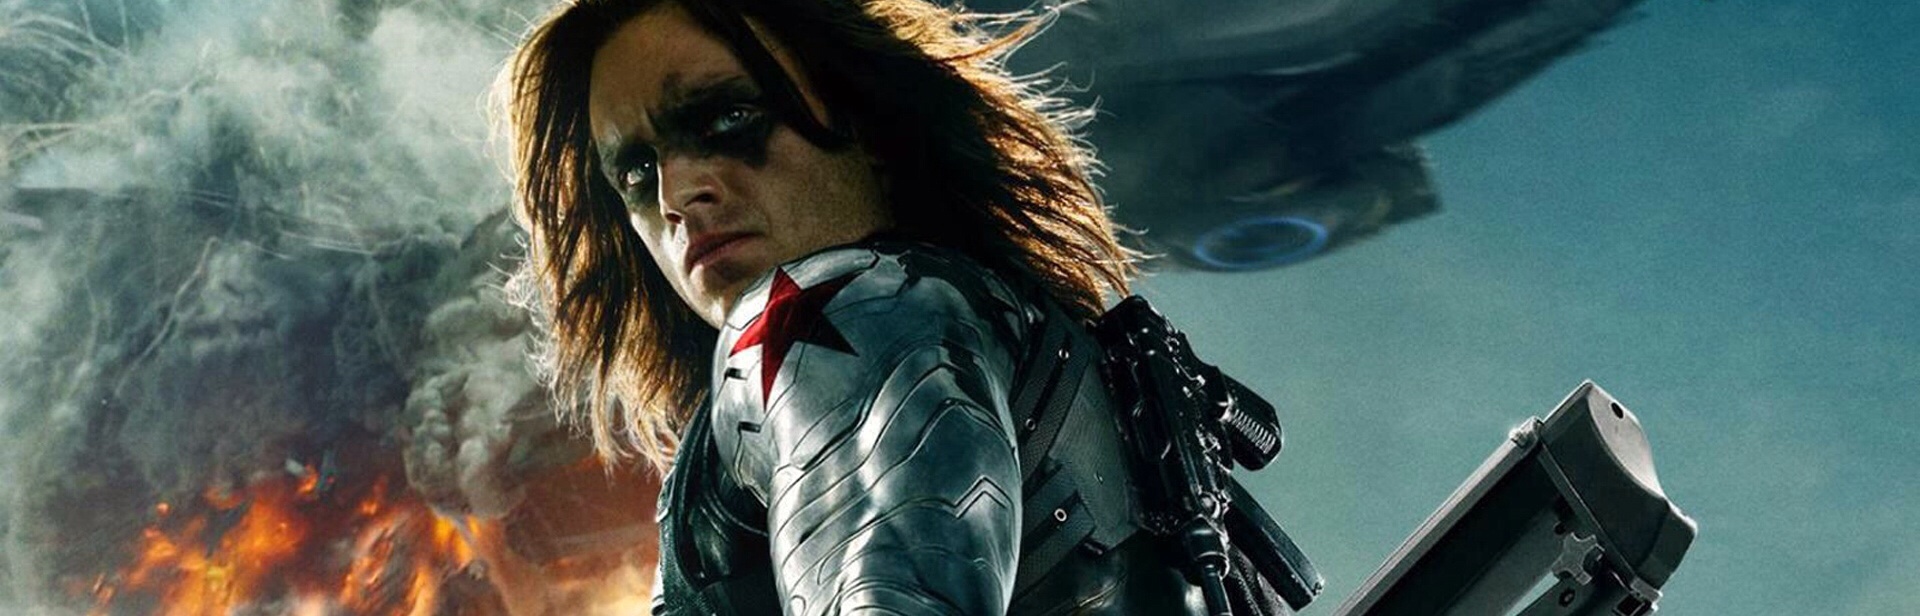 Captain America: The Winter Soldier Blu-ray SteelBook will be a Best Buy Exclusive in the US